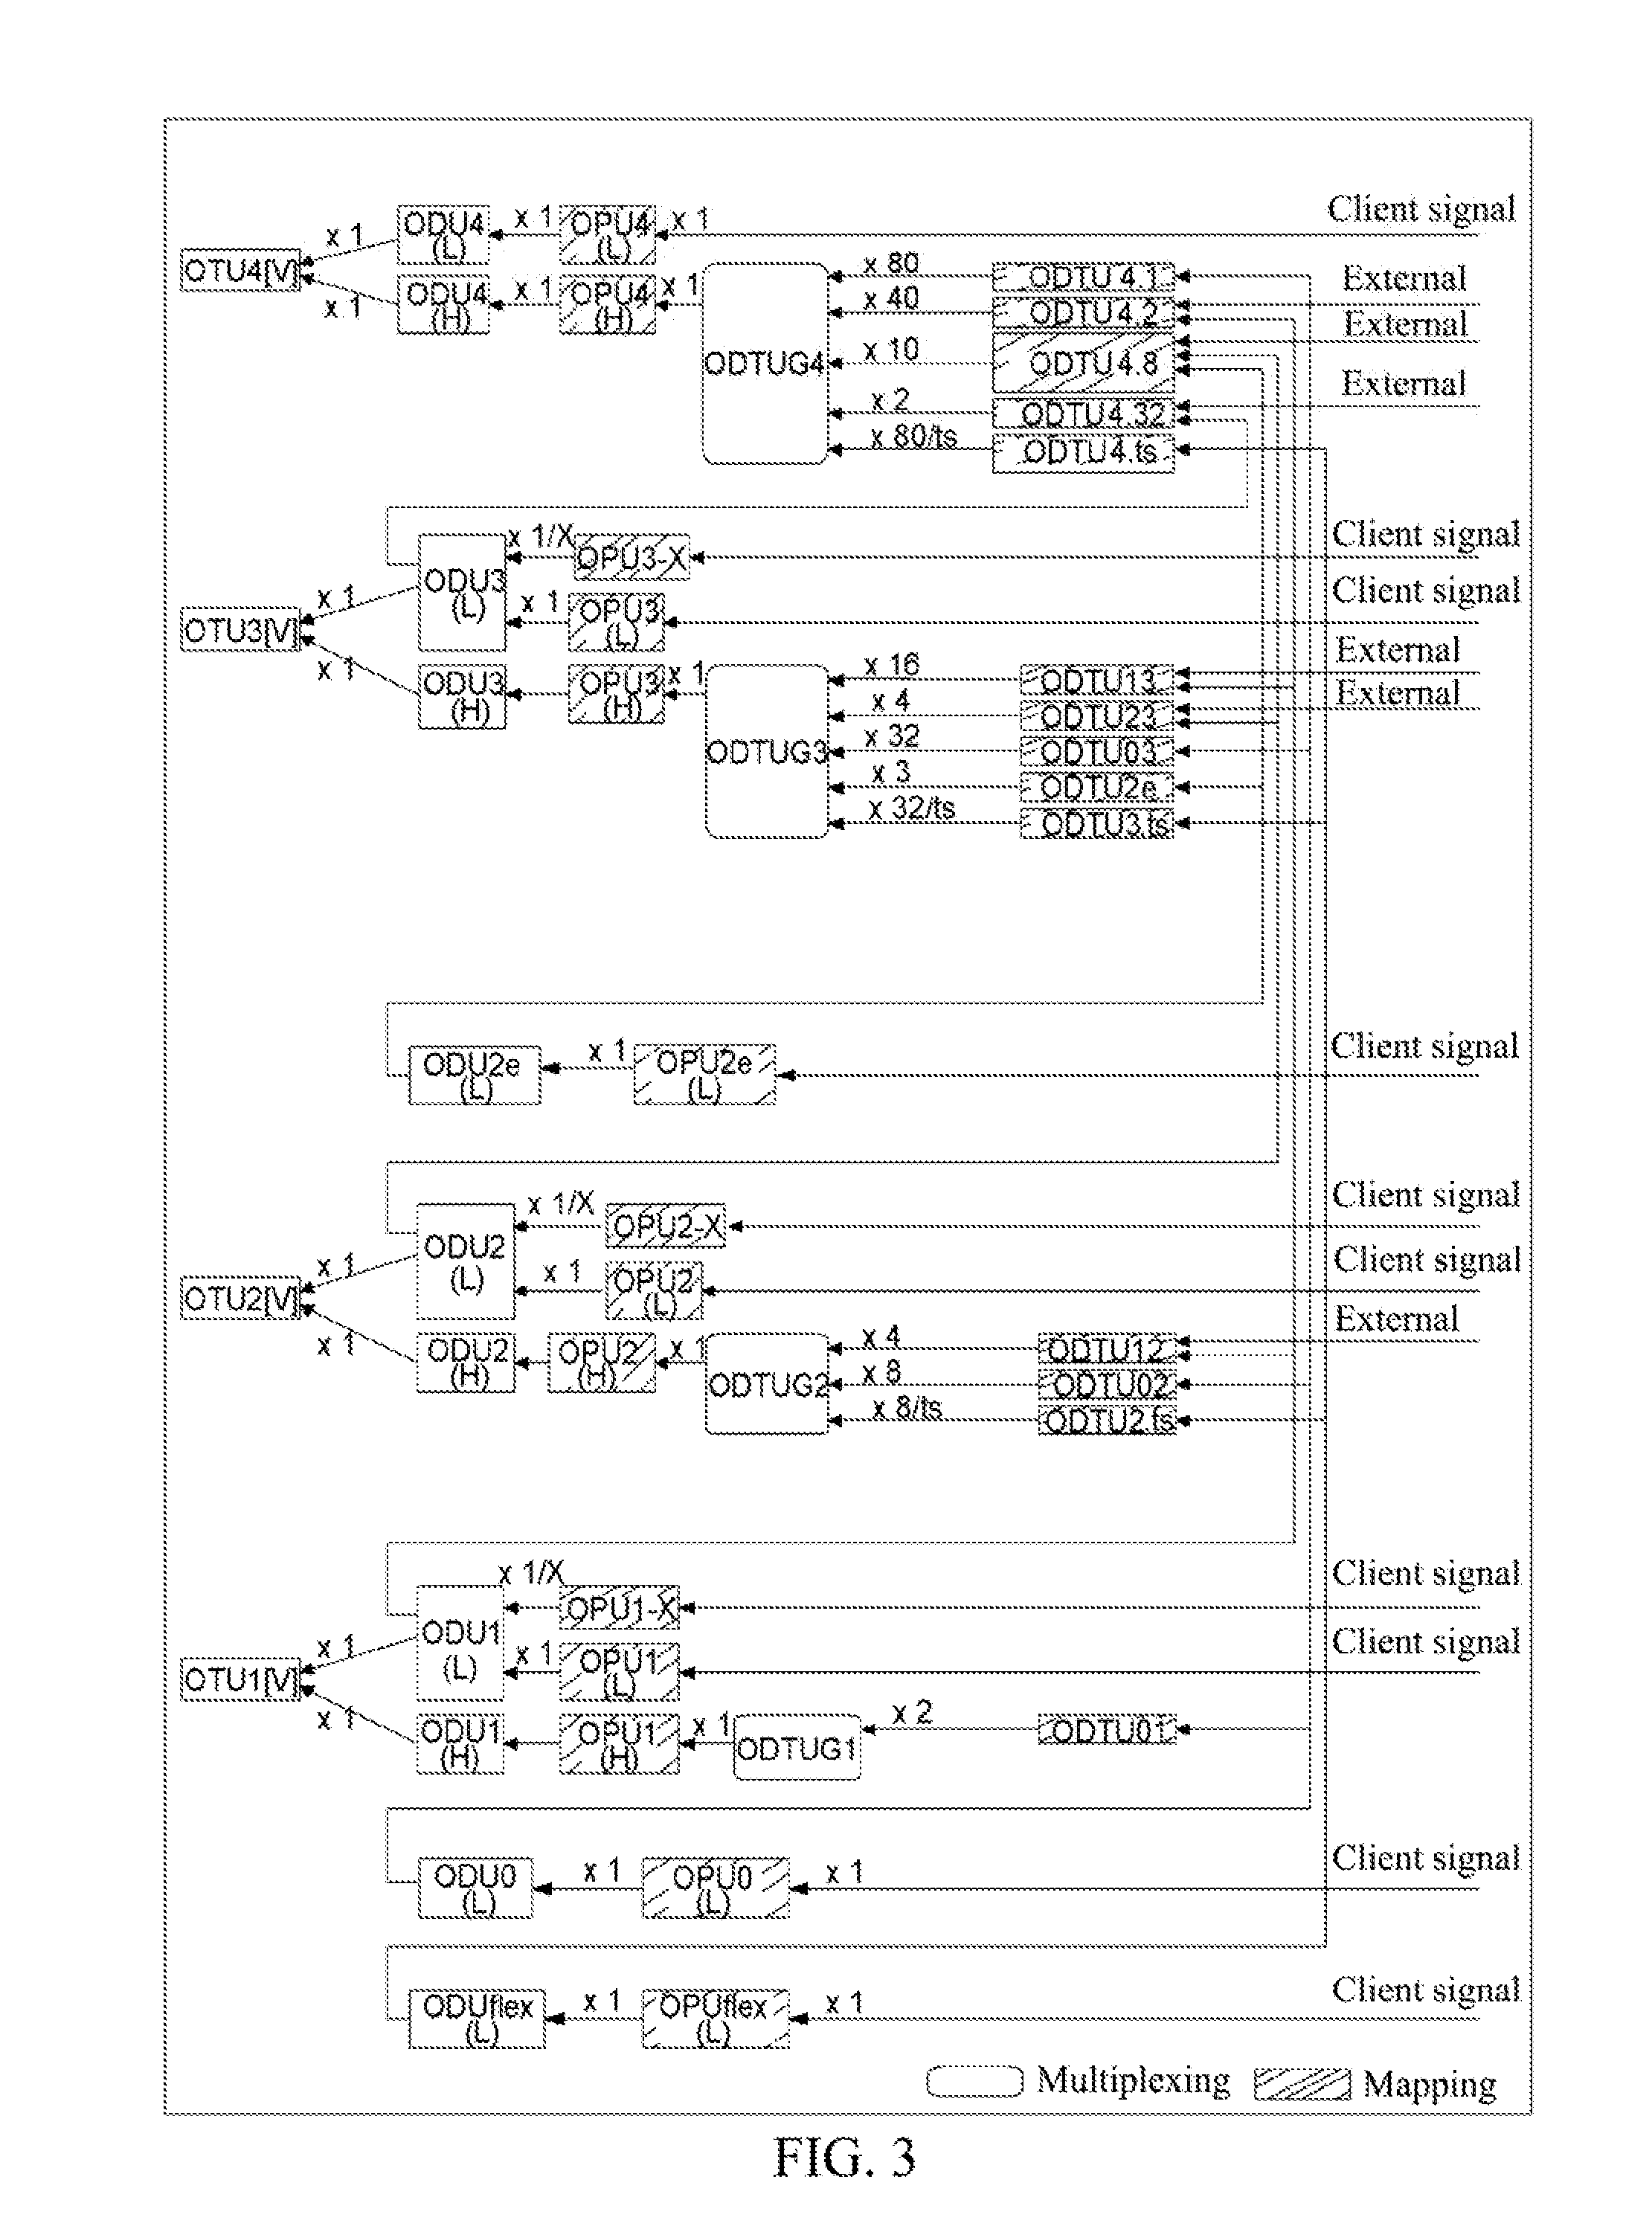 Signaling Control Method and System for Service Establishment Based on G.709